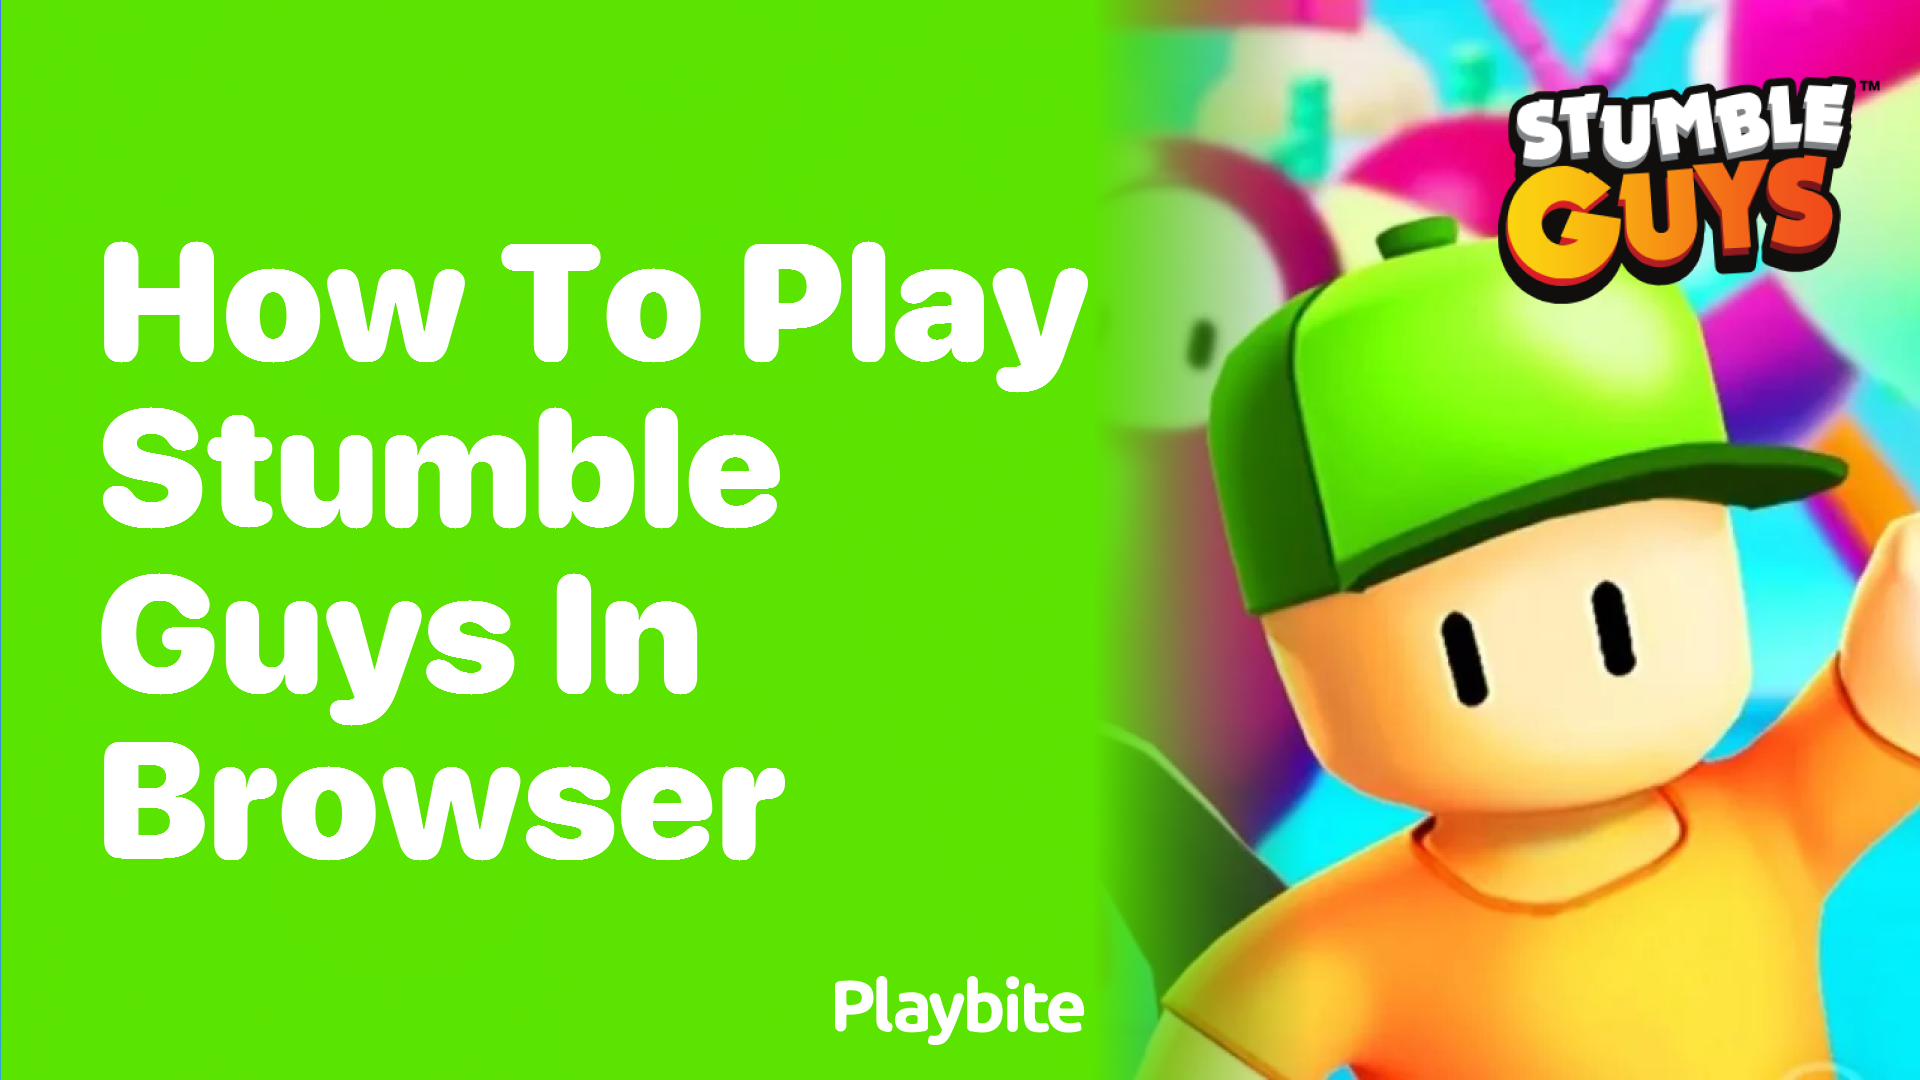 How to Play Stumble Guys in Browser